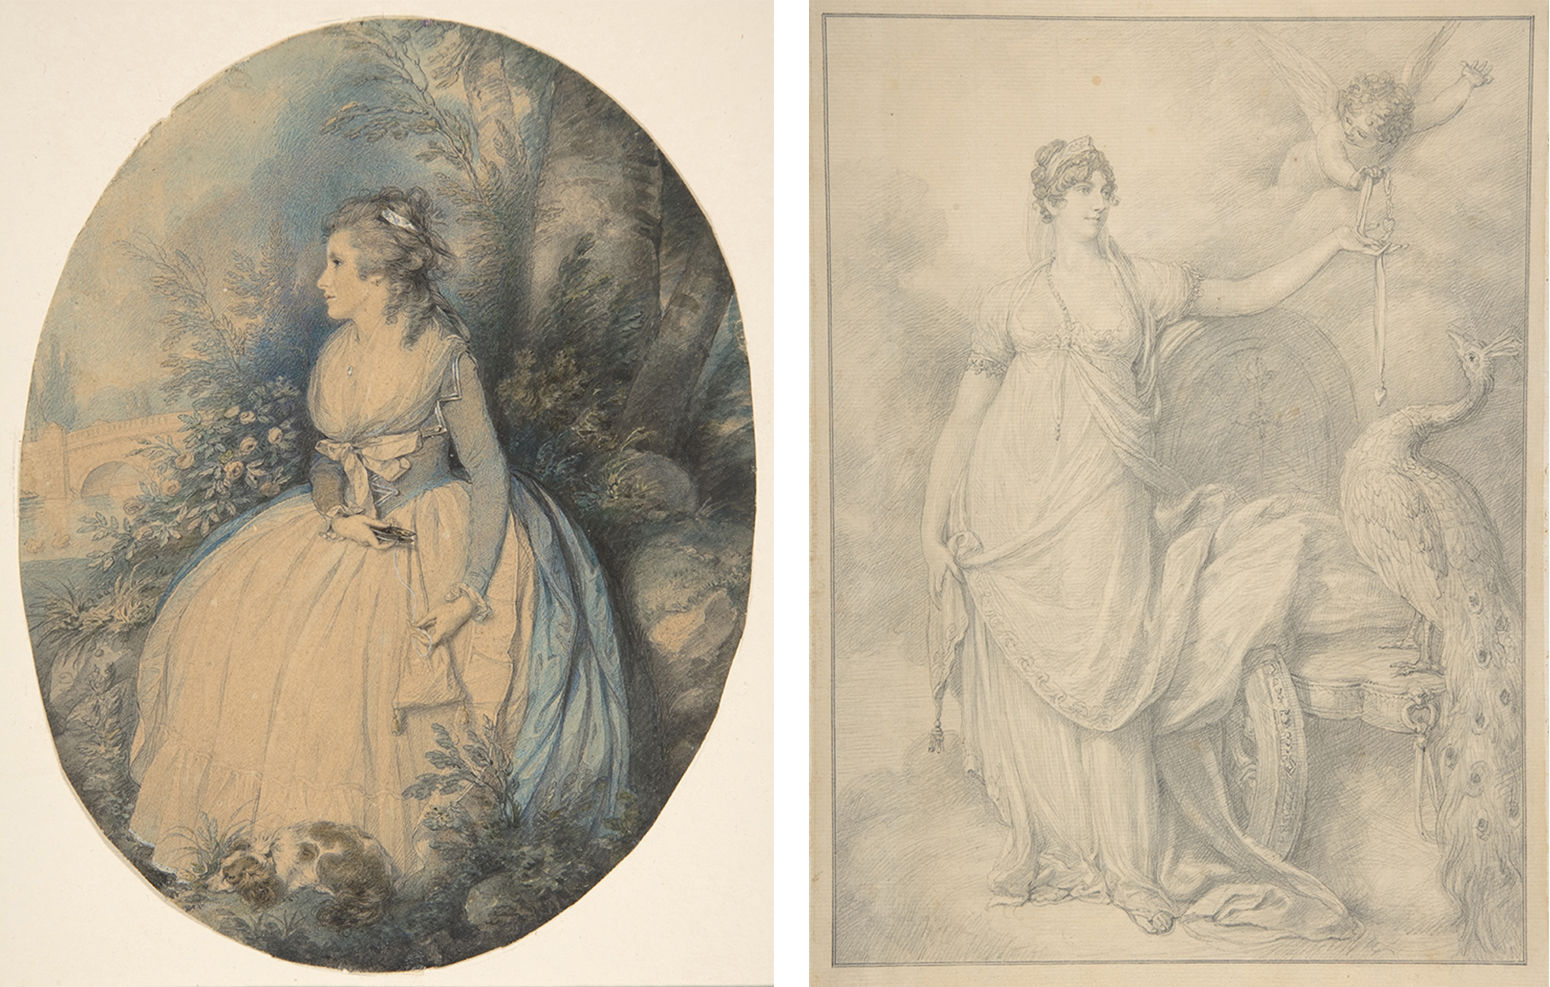 on the left, a watercolor and graphite drawing of a woman in a dress in a forest on the right a drawing of a woman in a dress with a peacock